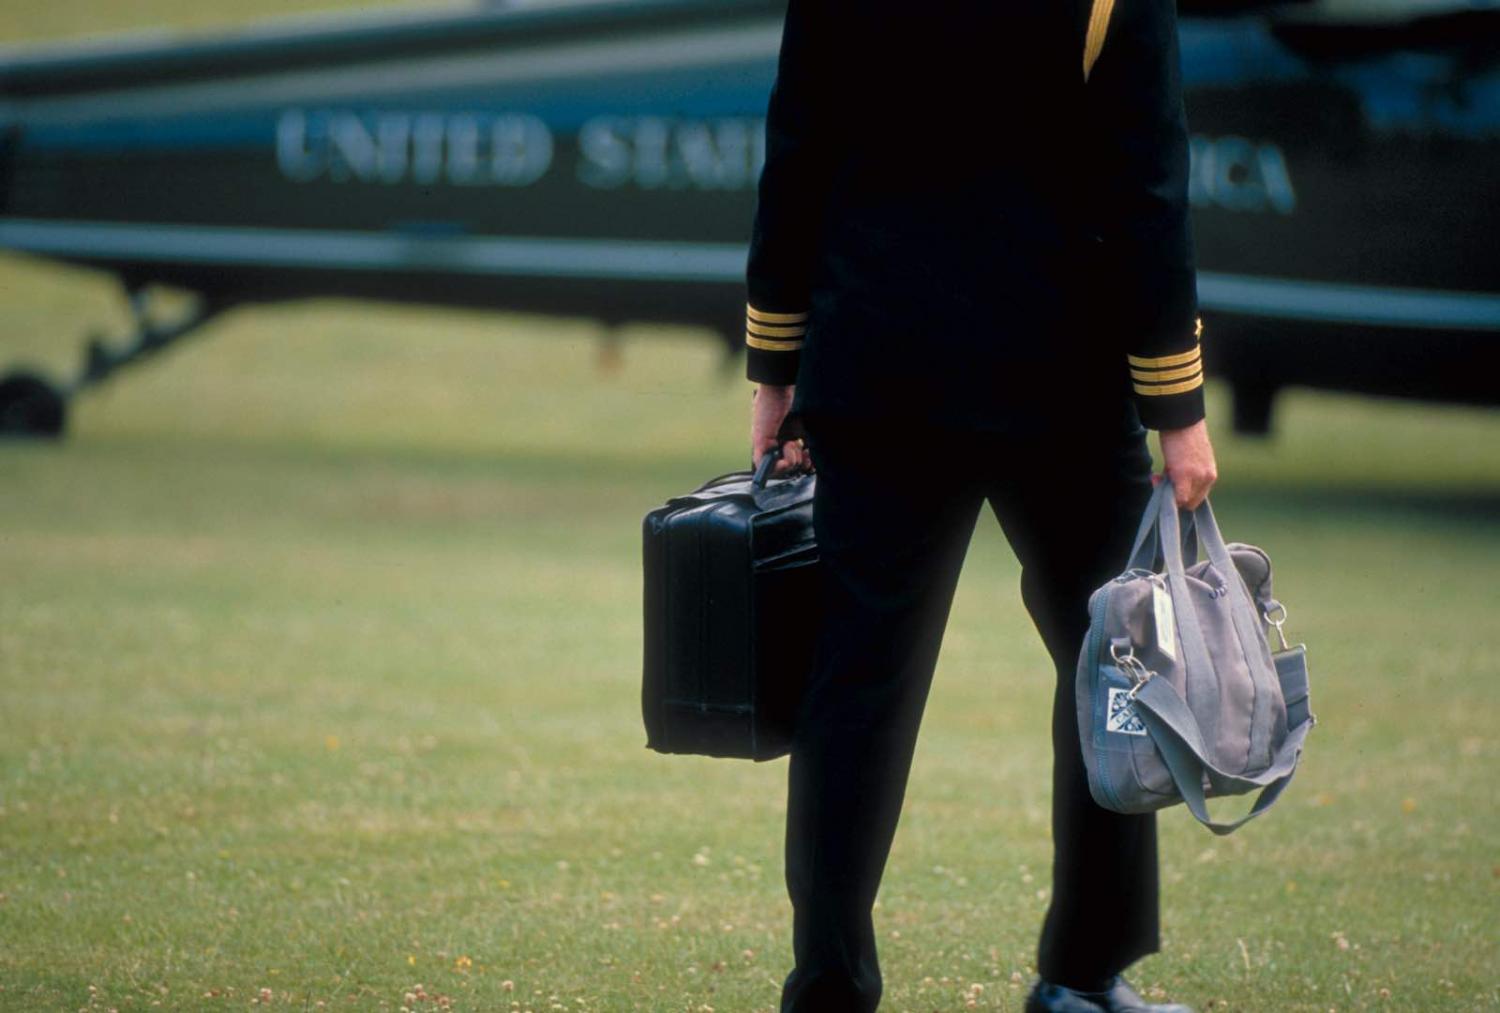 The Football, the briefcase containing nuclear missile launch codes that travels with the US President (Diana Walker/Life via Getty Images)